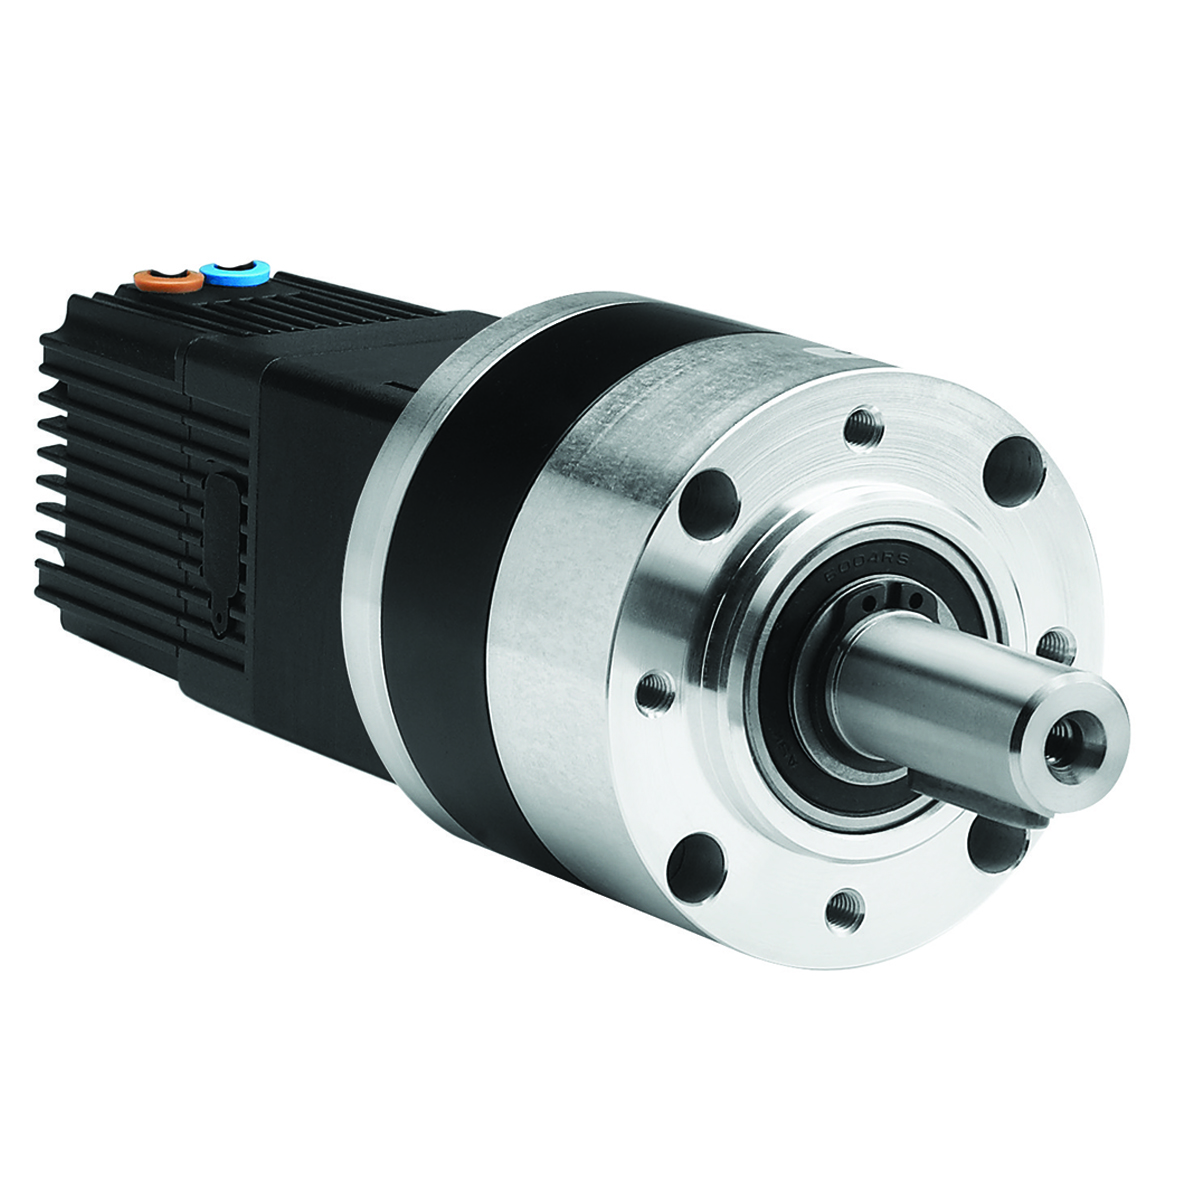 SQ57 Motor 150W 12-32Vdc + Drive TNi21 PWM + Gearbox P81 - 2 stages ratio 19.20-1